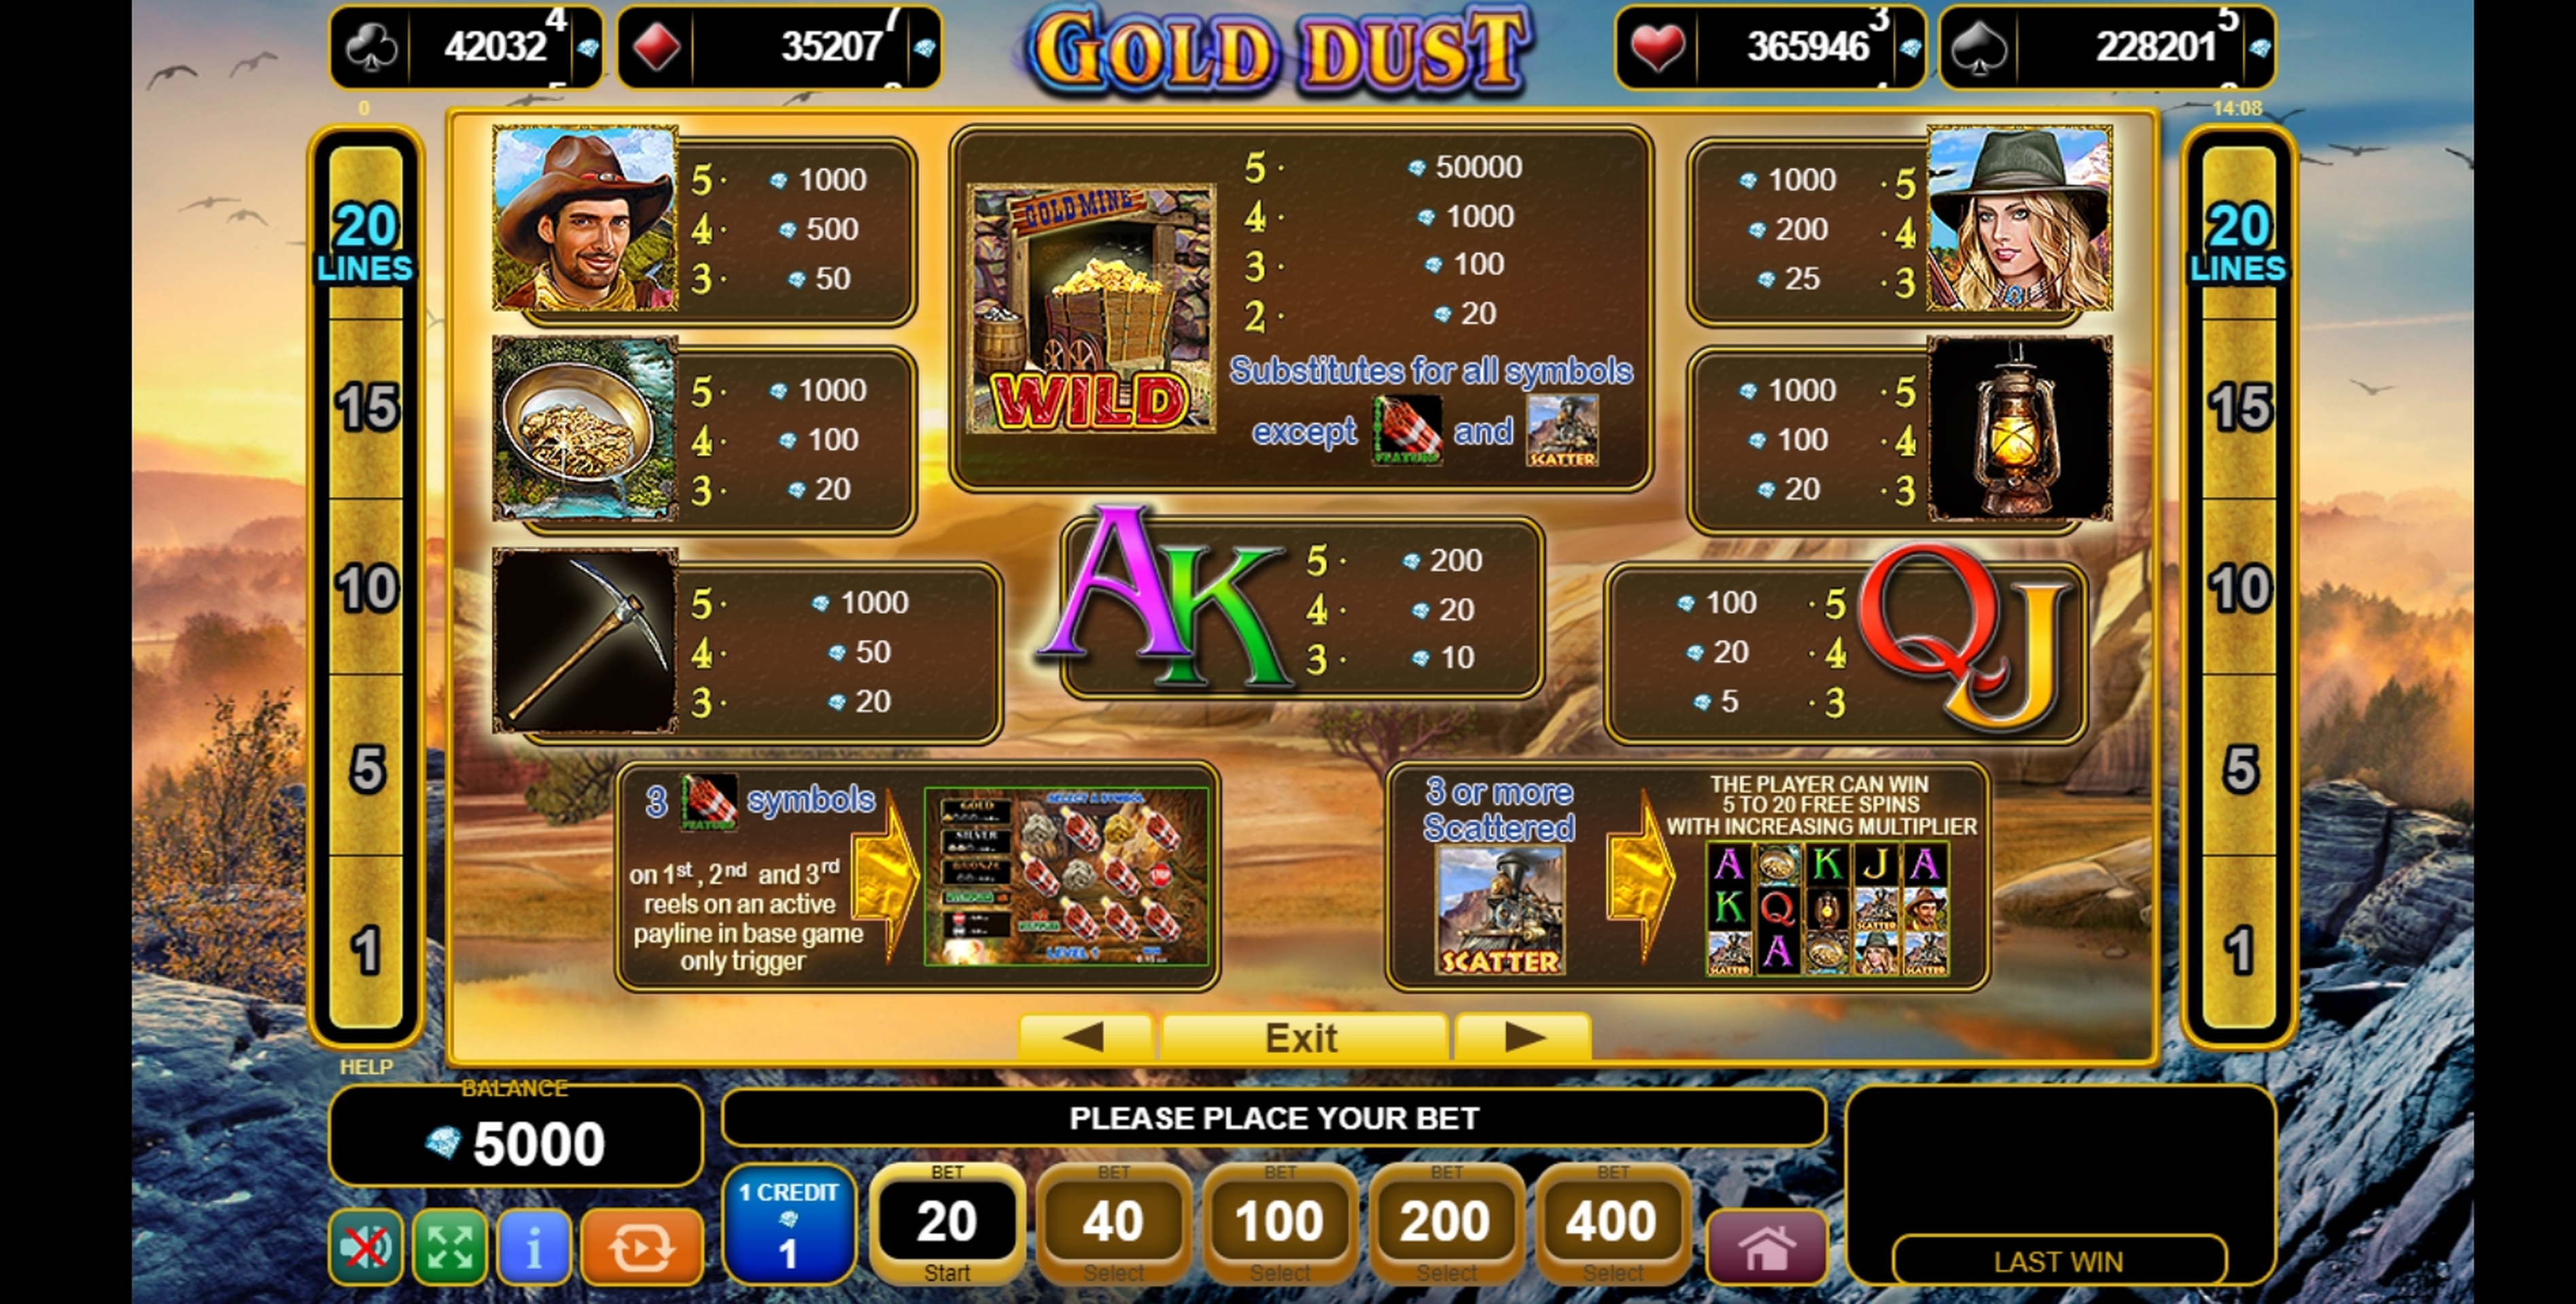 Info of Gold Dust Slot Game by EGT